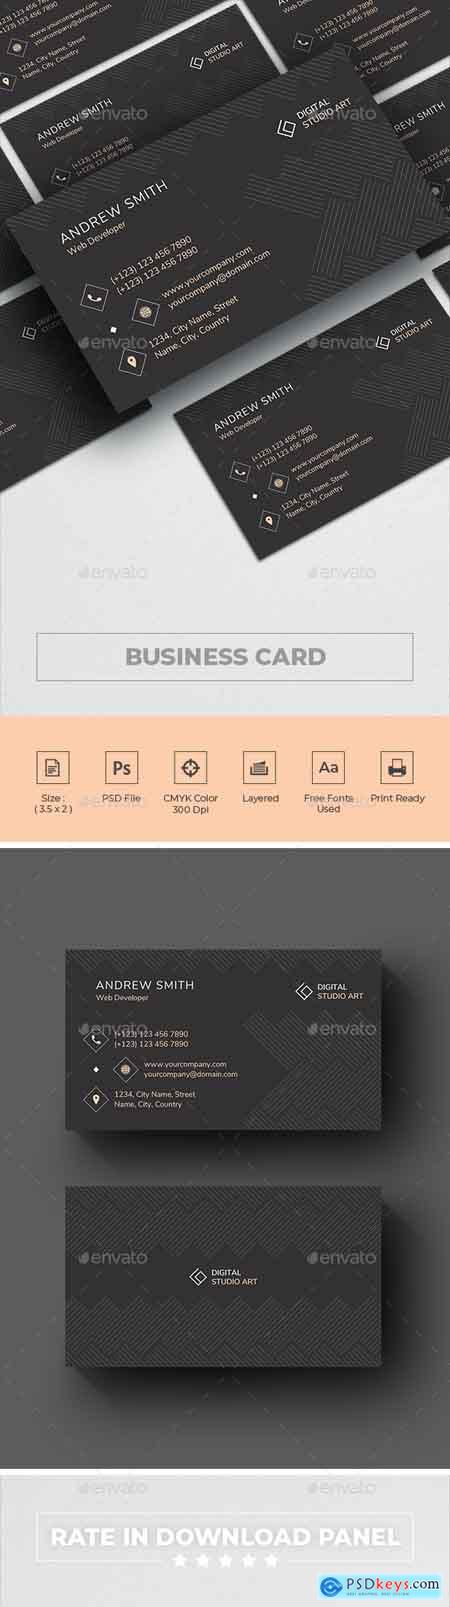 Graphicriver Business Card